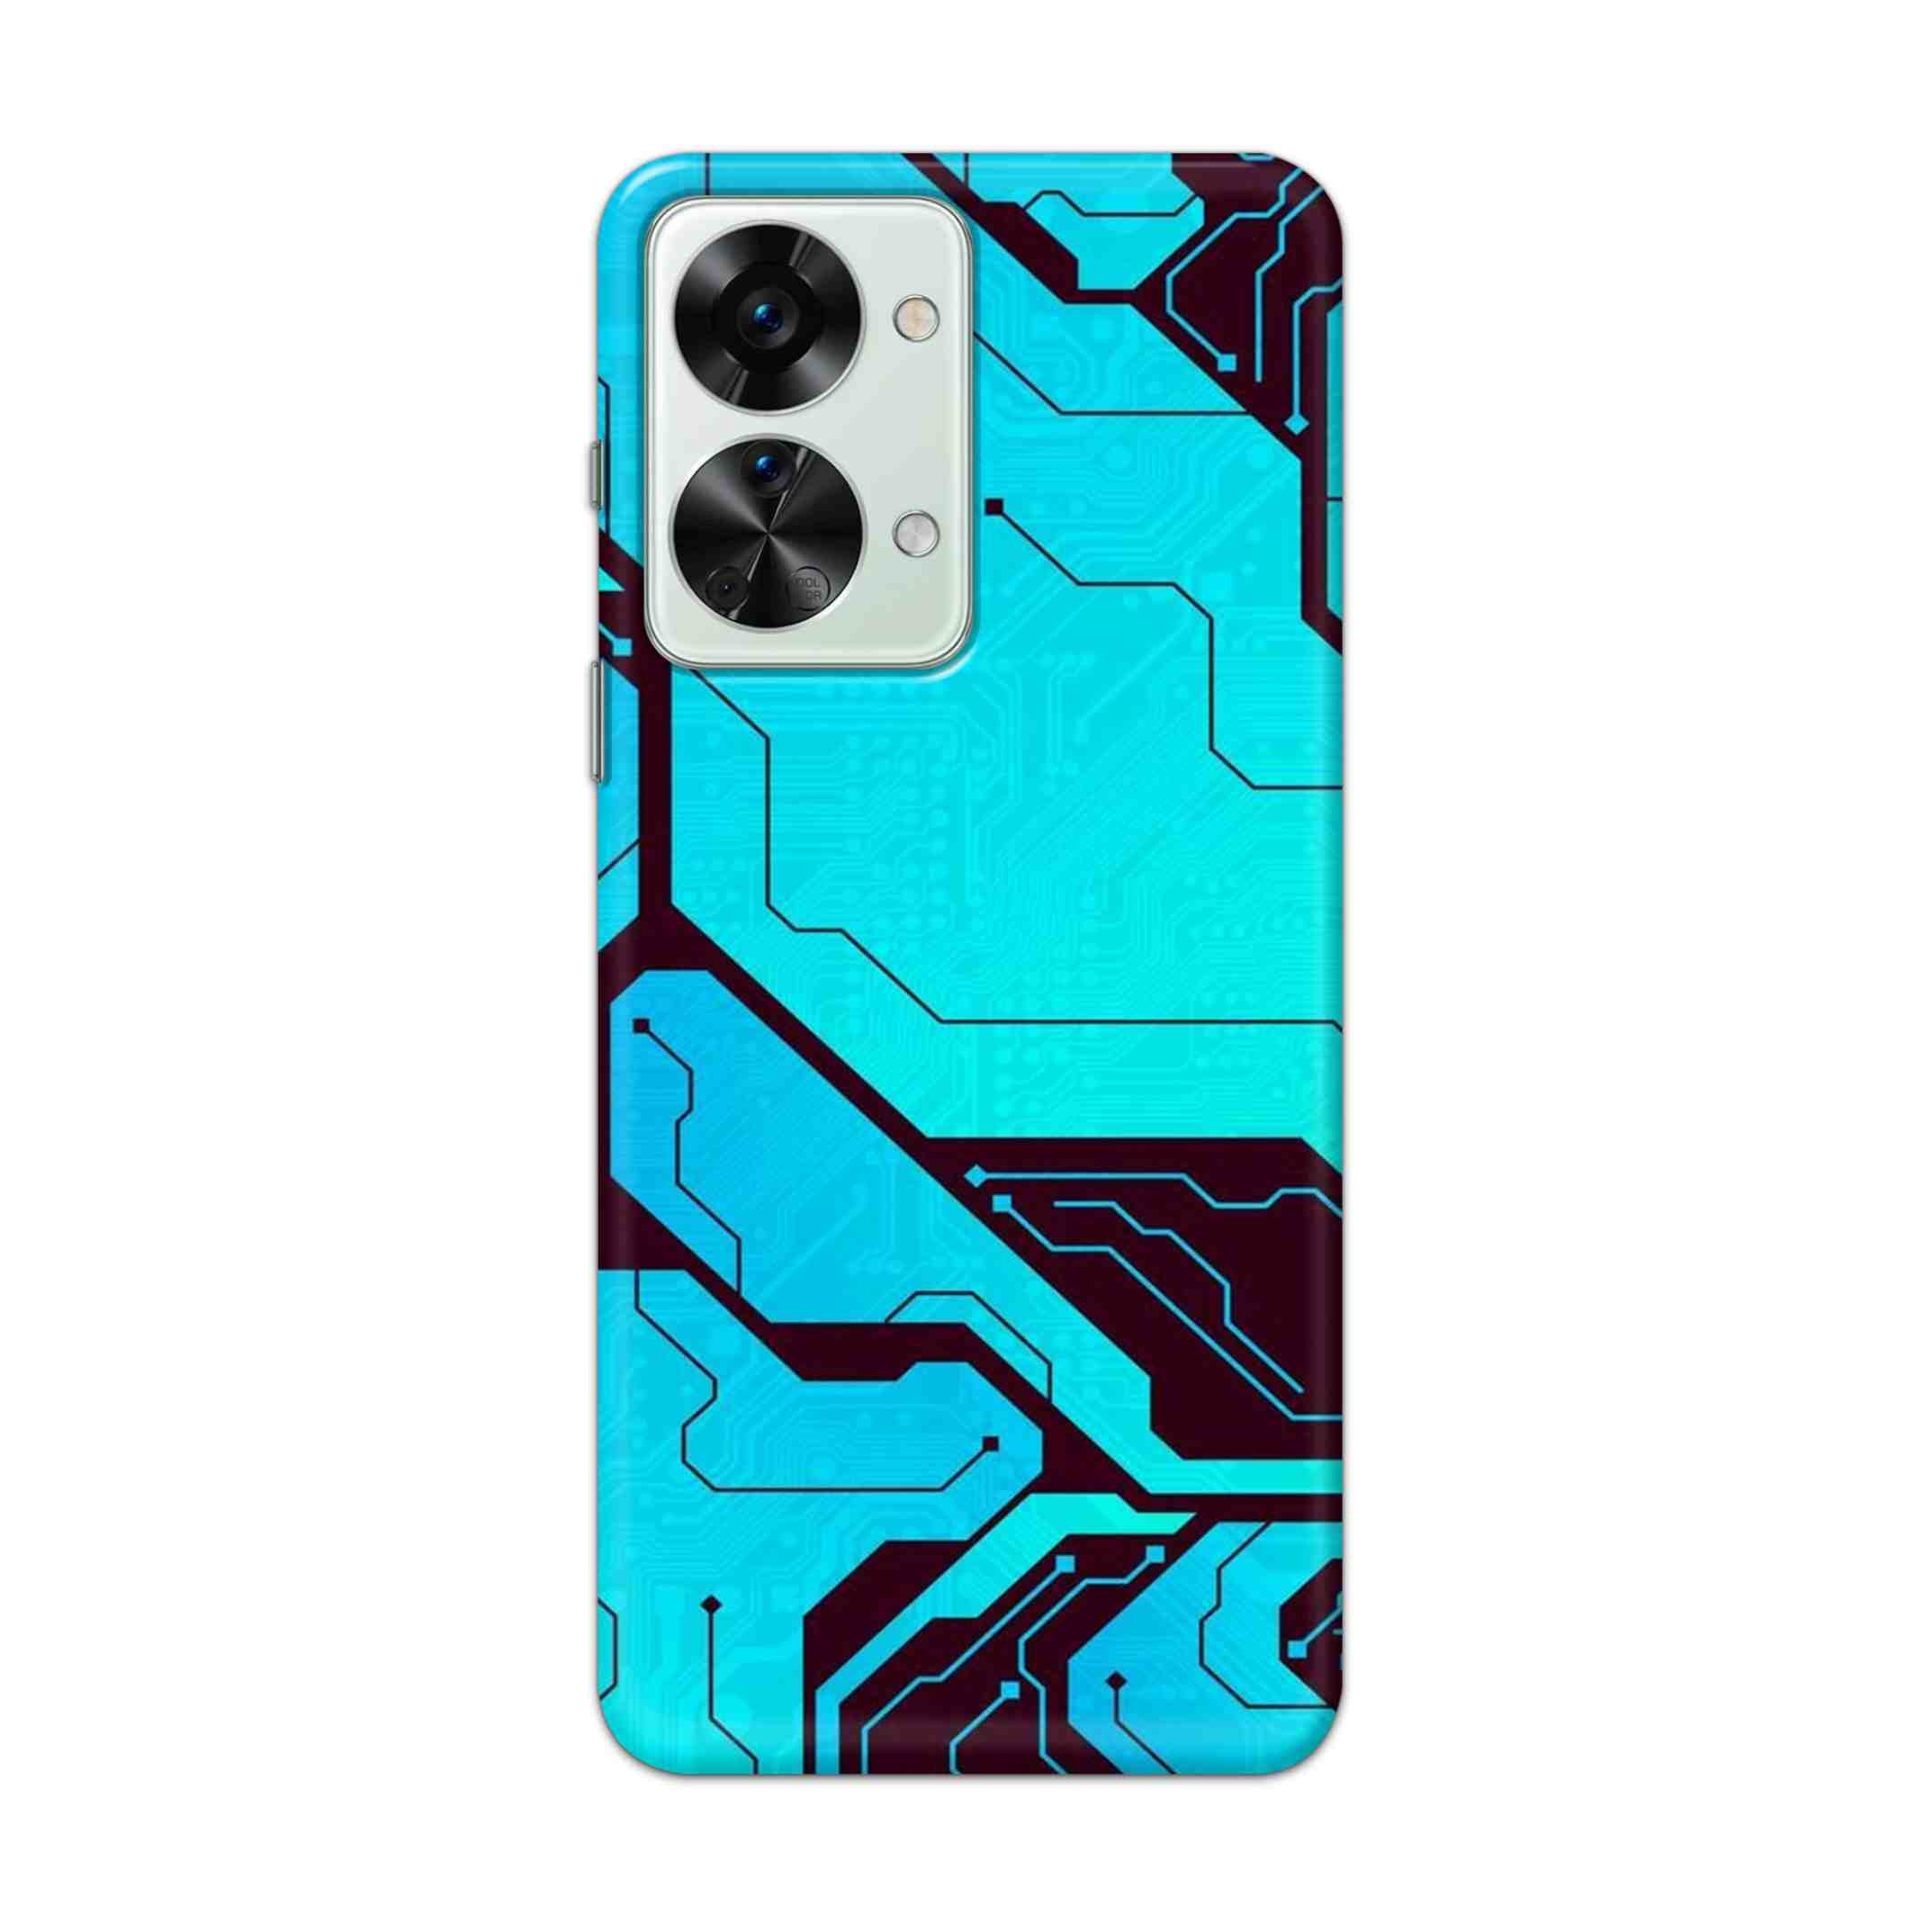 Buy Futuristic Line Hard Back Mobile Phone Case Cover For OnePlus Nord 2T 5G Online